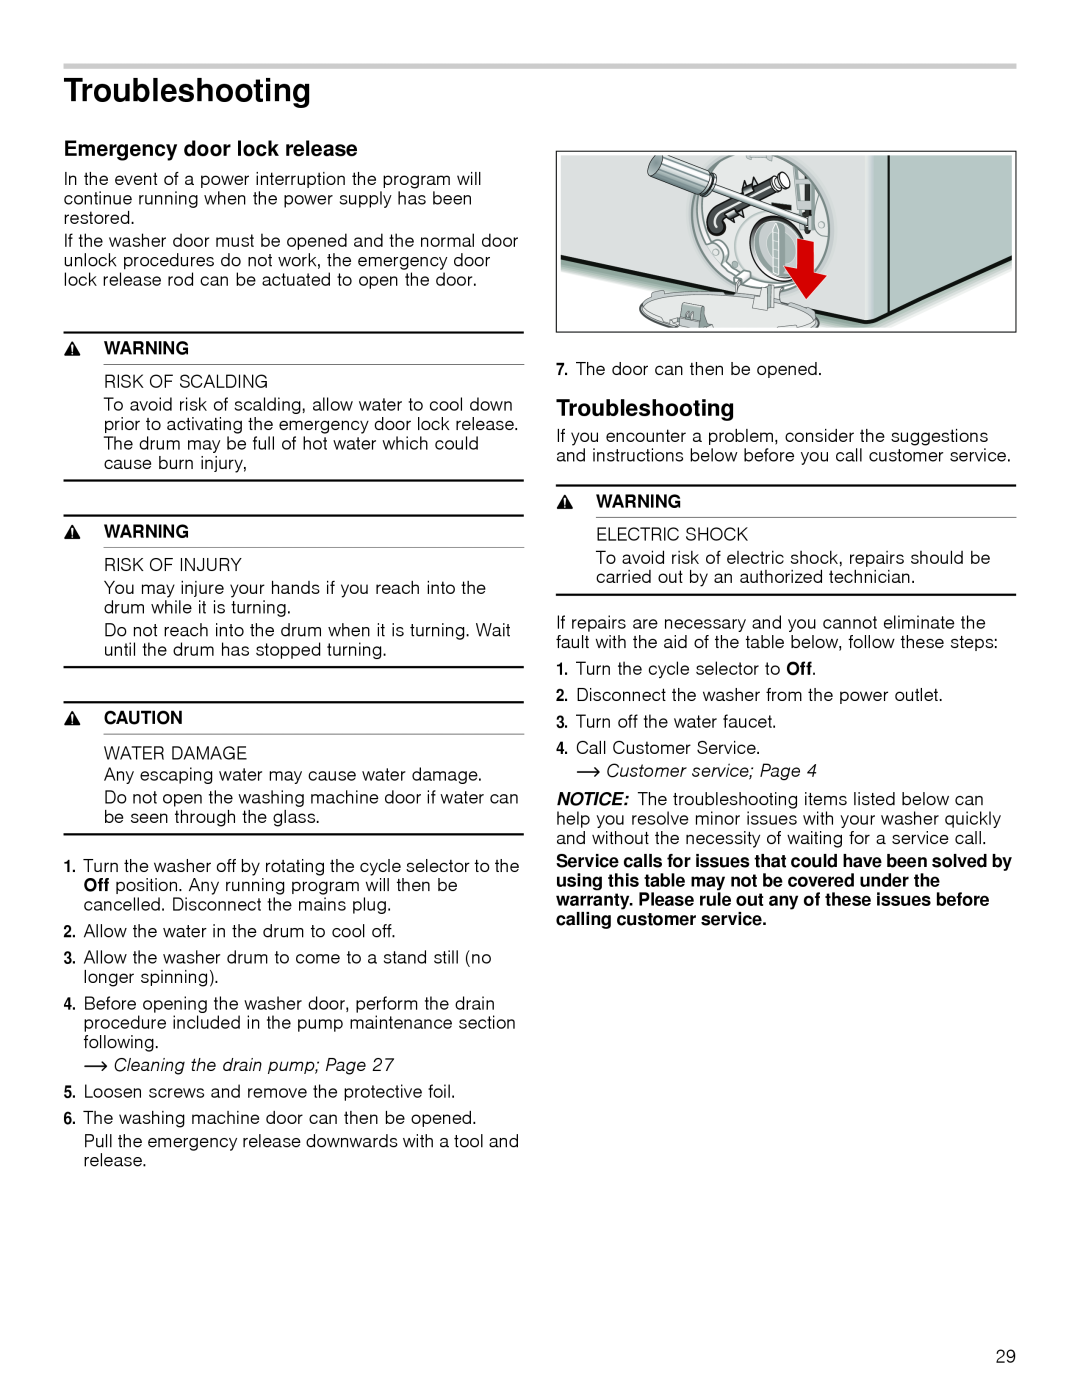 Bosch Appliances WAP24201UC Troubleshooting, Emergency door lock release, ~ Cleaning the drain pump Page, Warning, Caution 